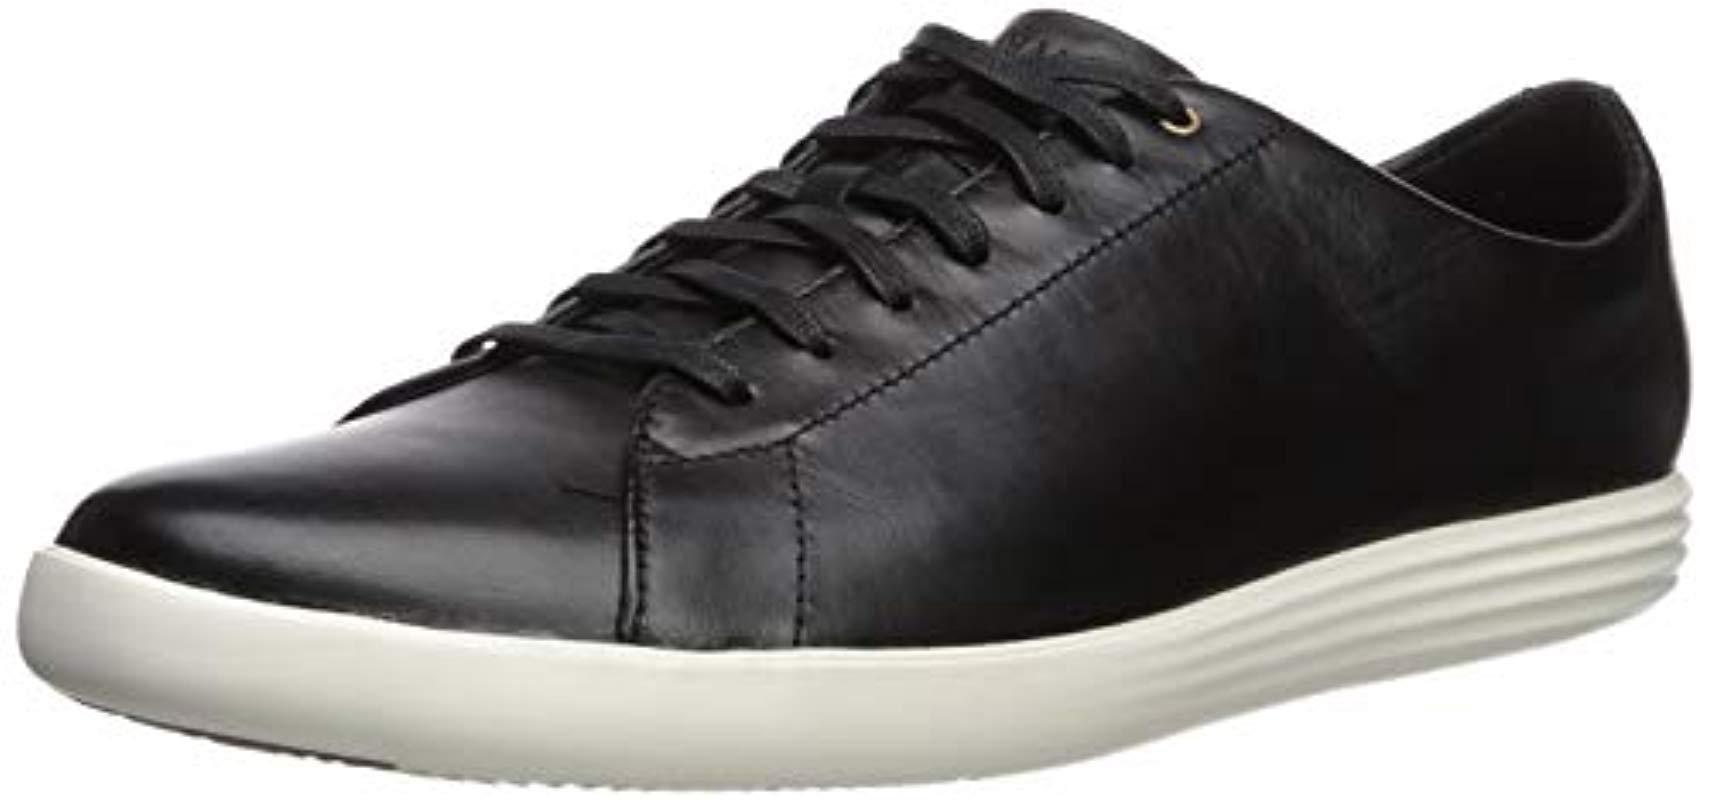 Lyst - Cole Haan Grand Crosscourt Ii Oxford in Black for Men - Save 24%